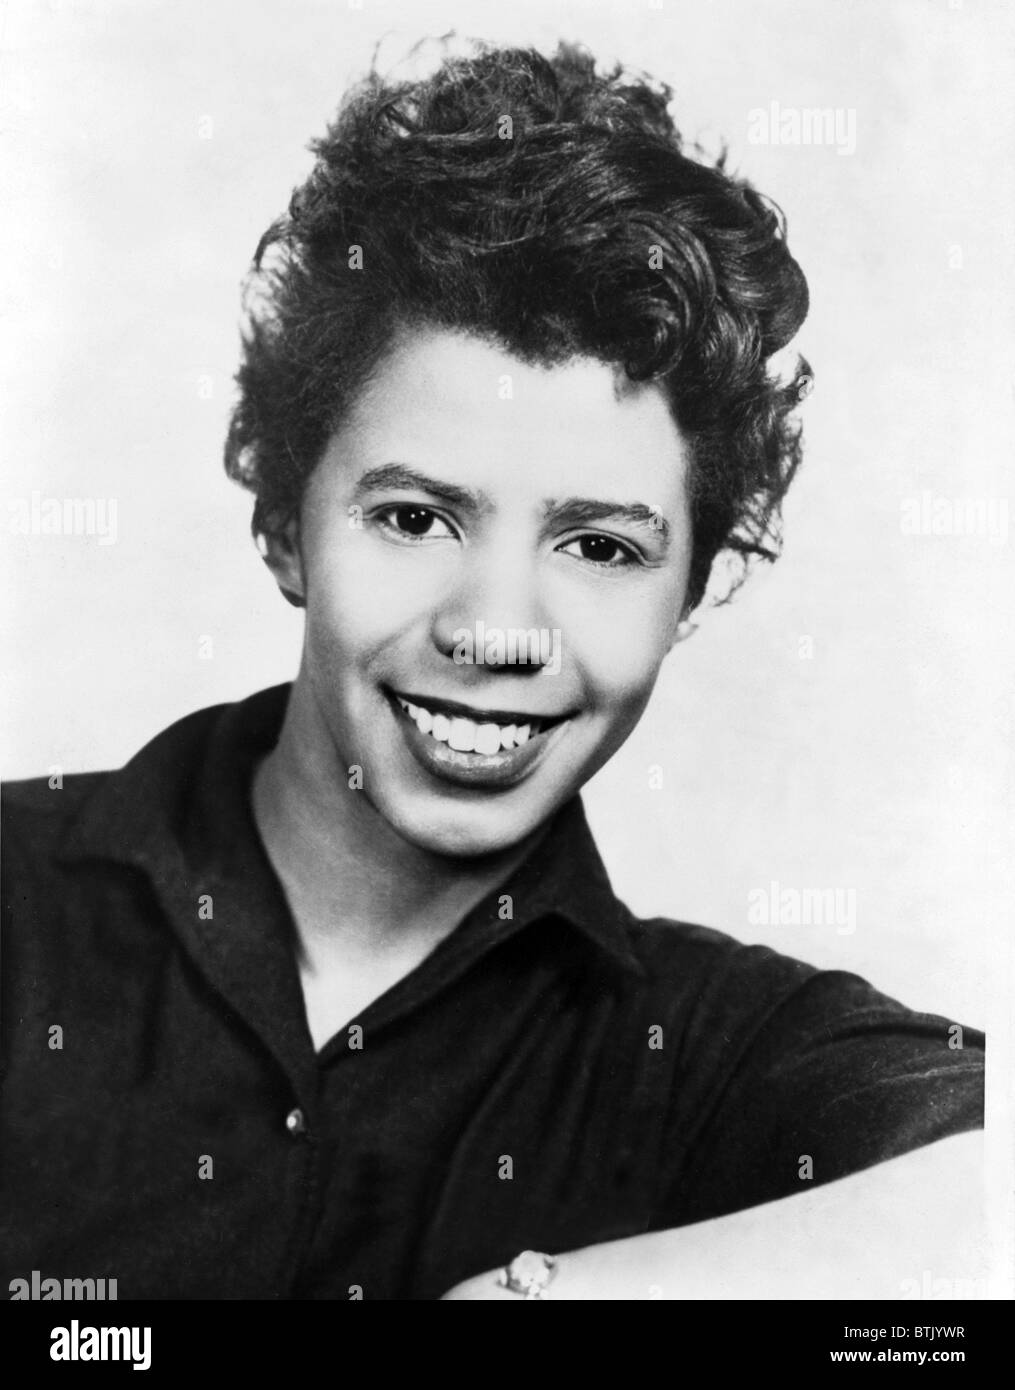 Lorraine Hansberry (1930-1965) African American playwright wrote 'A Raisin in the Sun,' (1959), which was made into a film in 1961 and 2008. 1959 portrait. Stock Photo